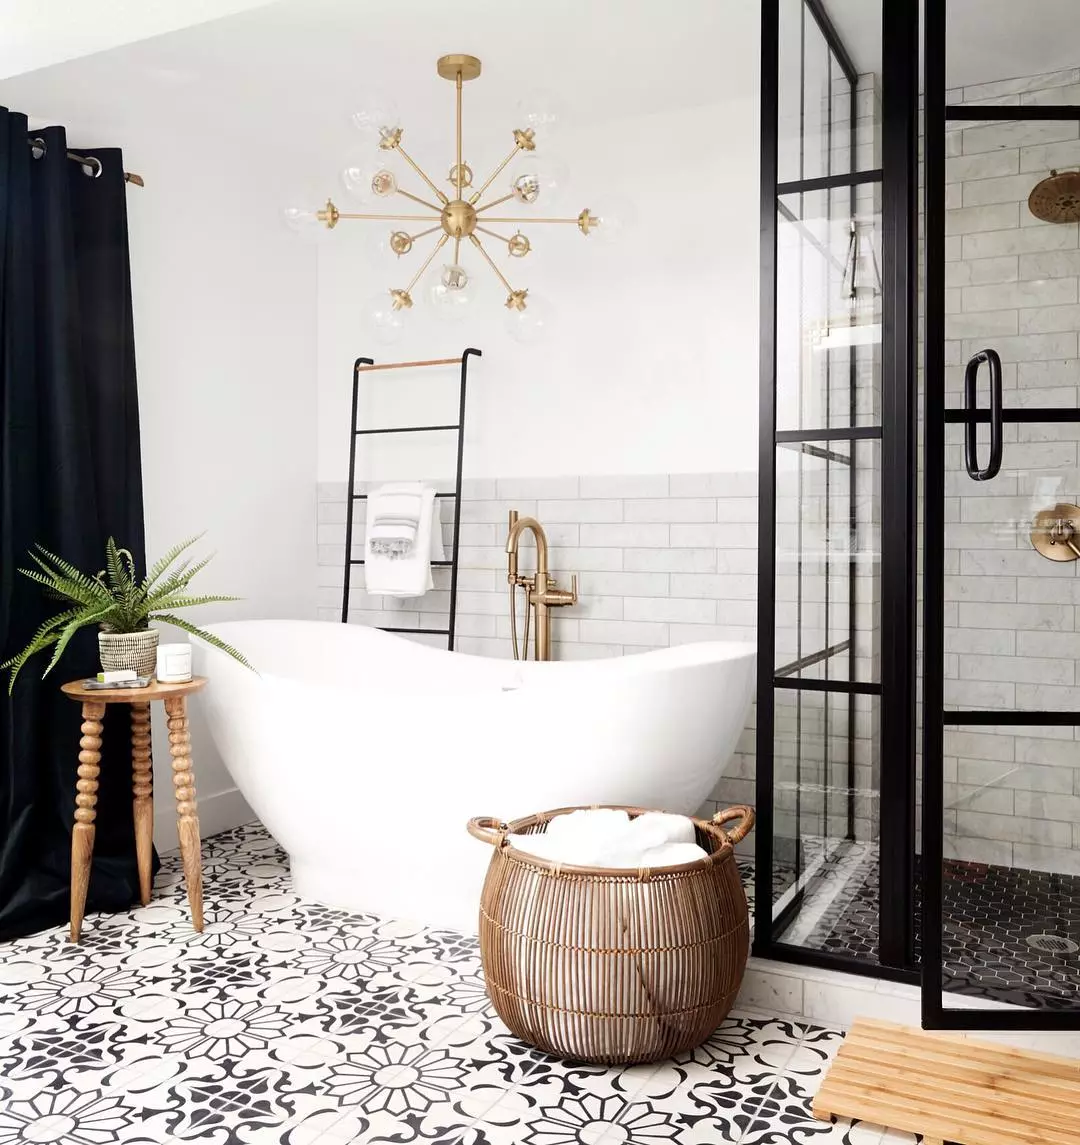 https://www.extraspace.com/blog/wp-content/uploads/2018/09/bathroom-remodel-ways-to-upgrade-your-space-swap-out-old-flooring.jpg.webp